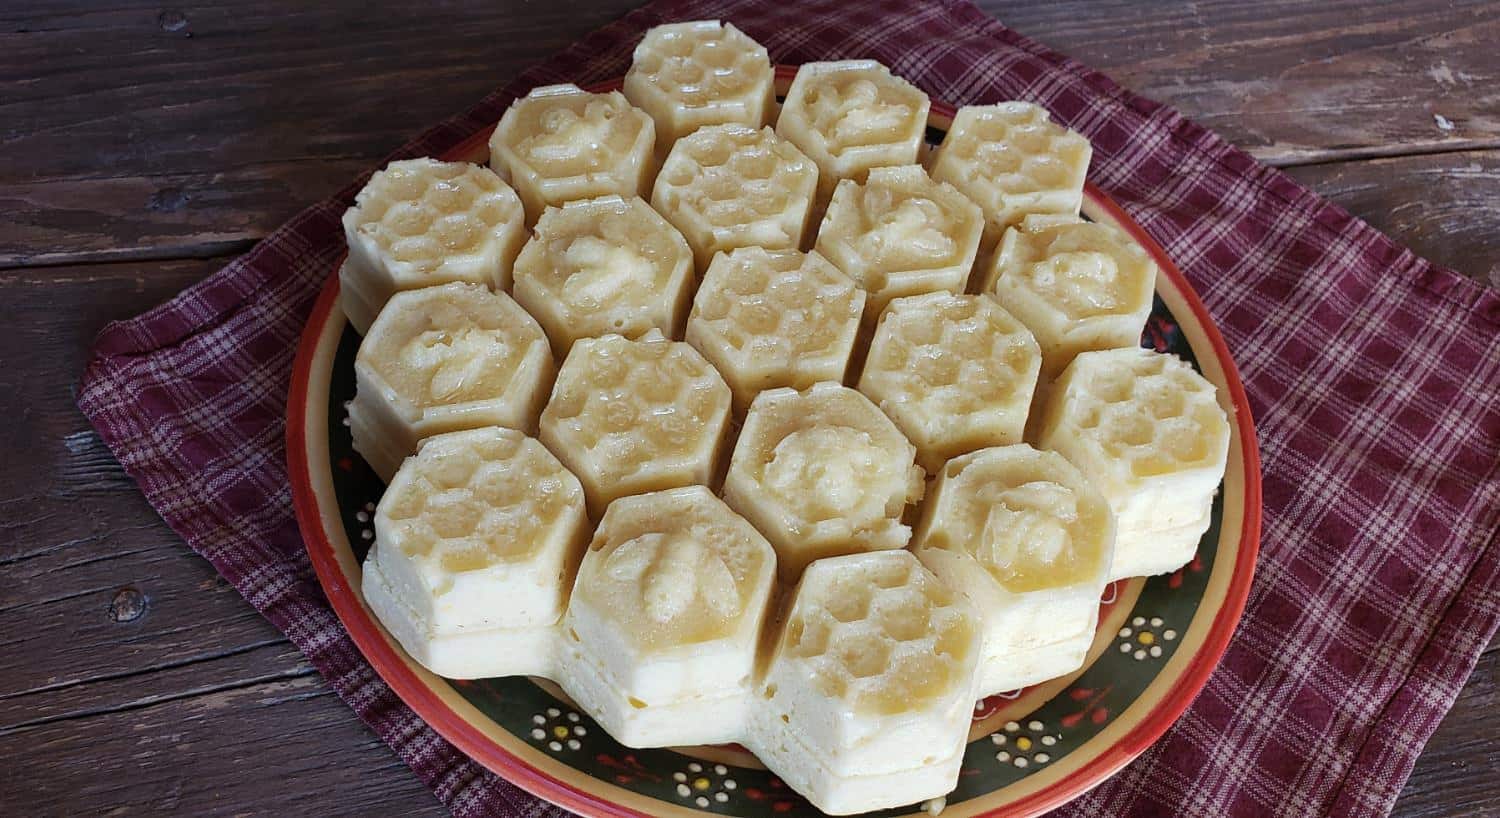 Close up view of a dessert in the shape of honeycomb